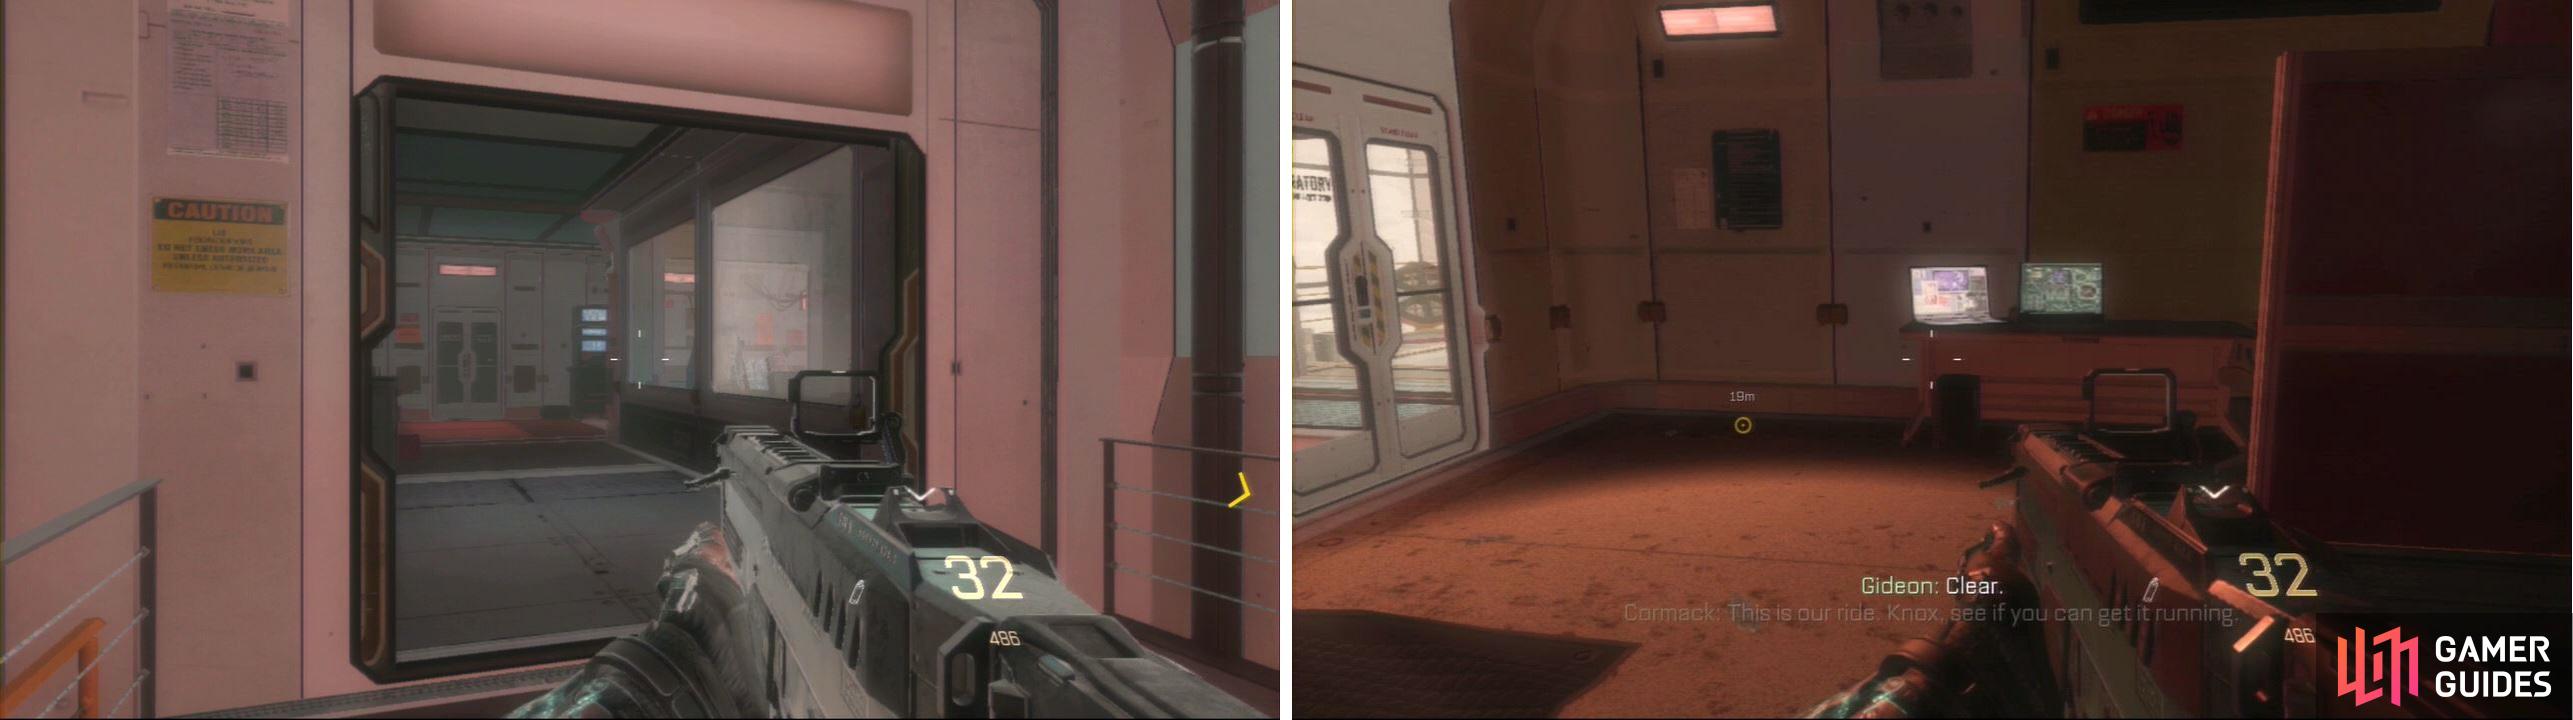 After crossing the area with the AST and when you’re going towards the tank, check the room to the right, break the glass and enter to get your Intel.